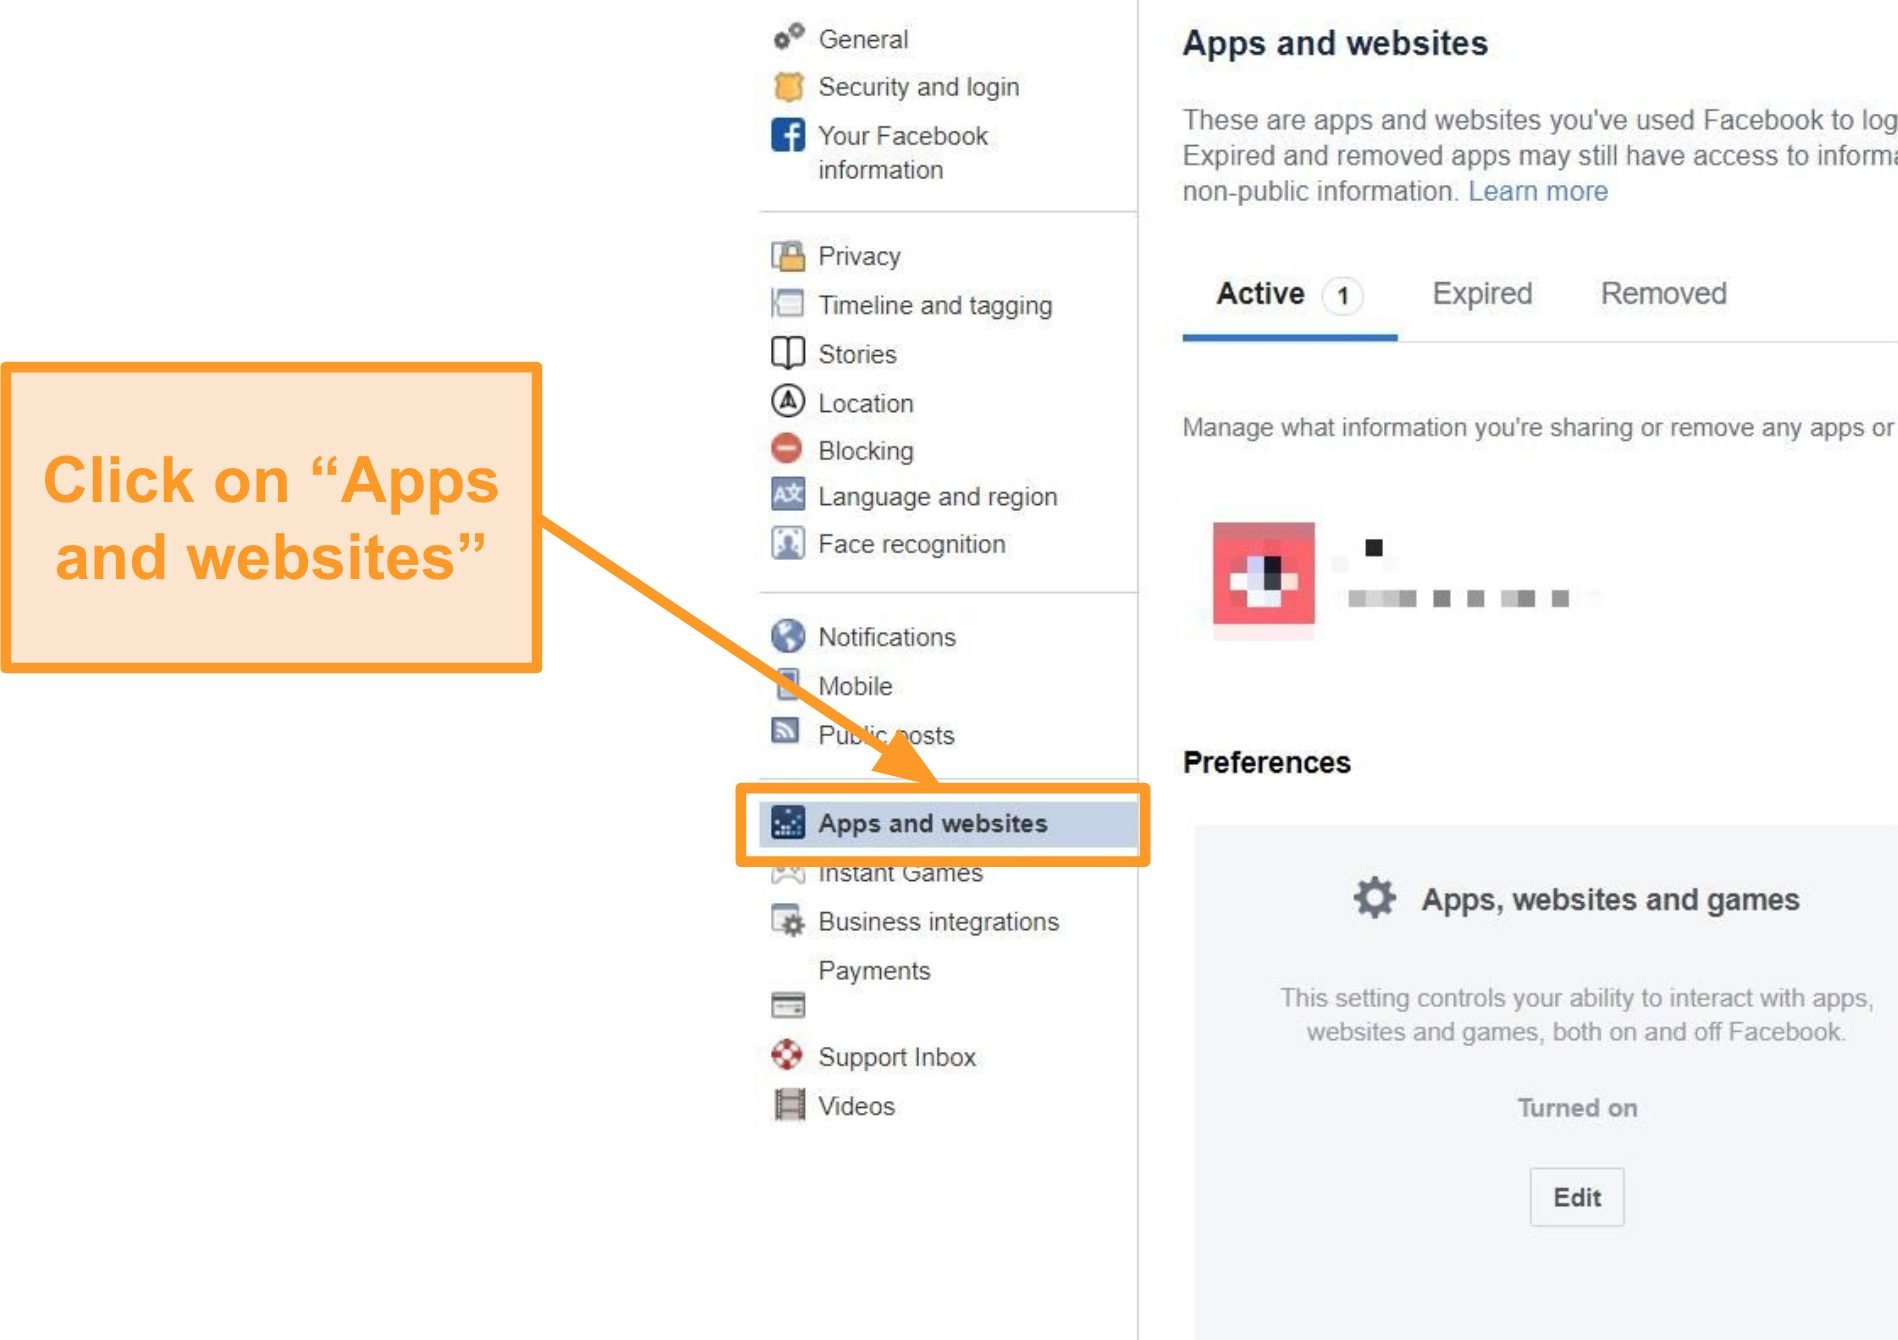 Screenshot of apps and websites settings on Facebook